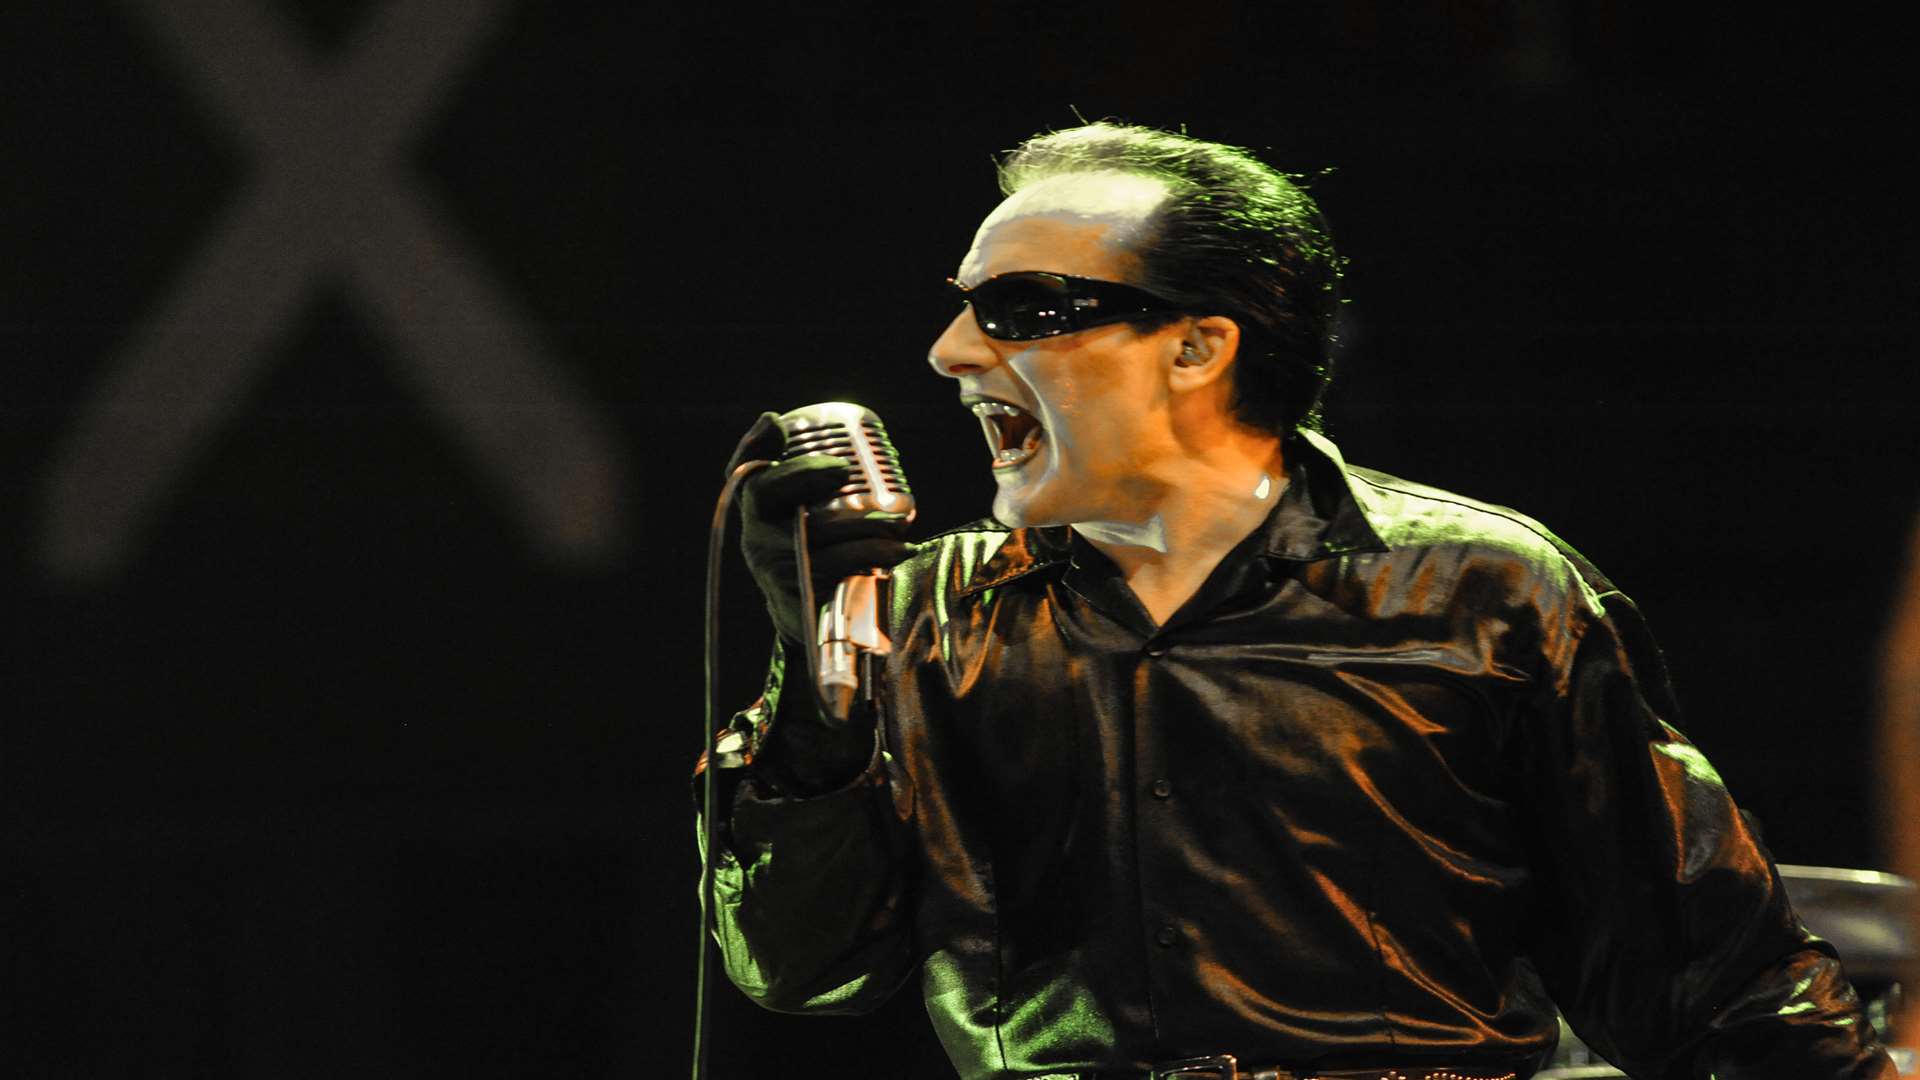 David Vanian of The Damned